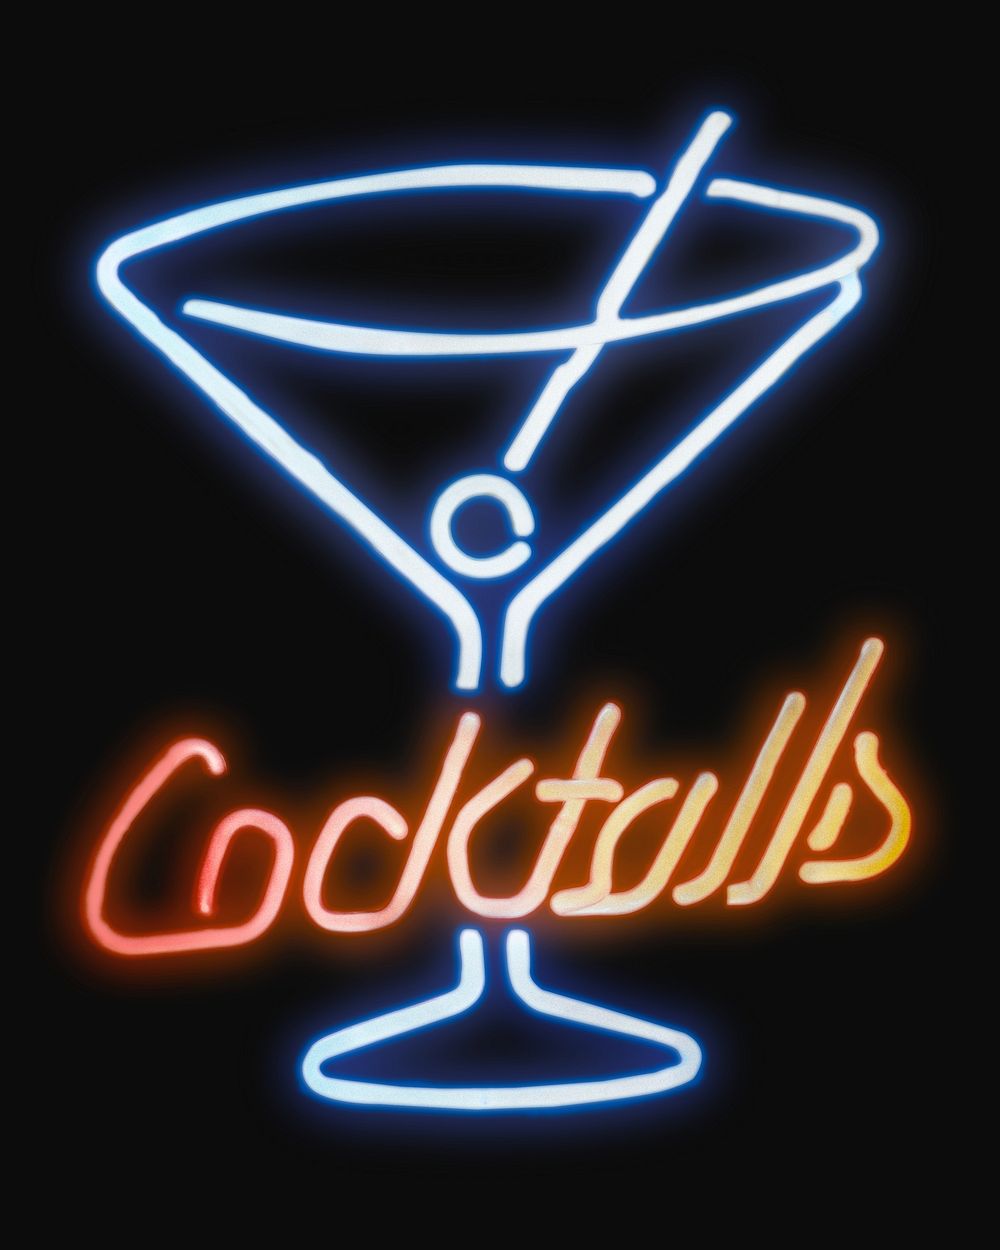 Cocktail neon sign on black